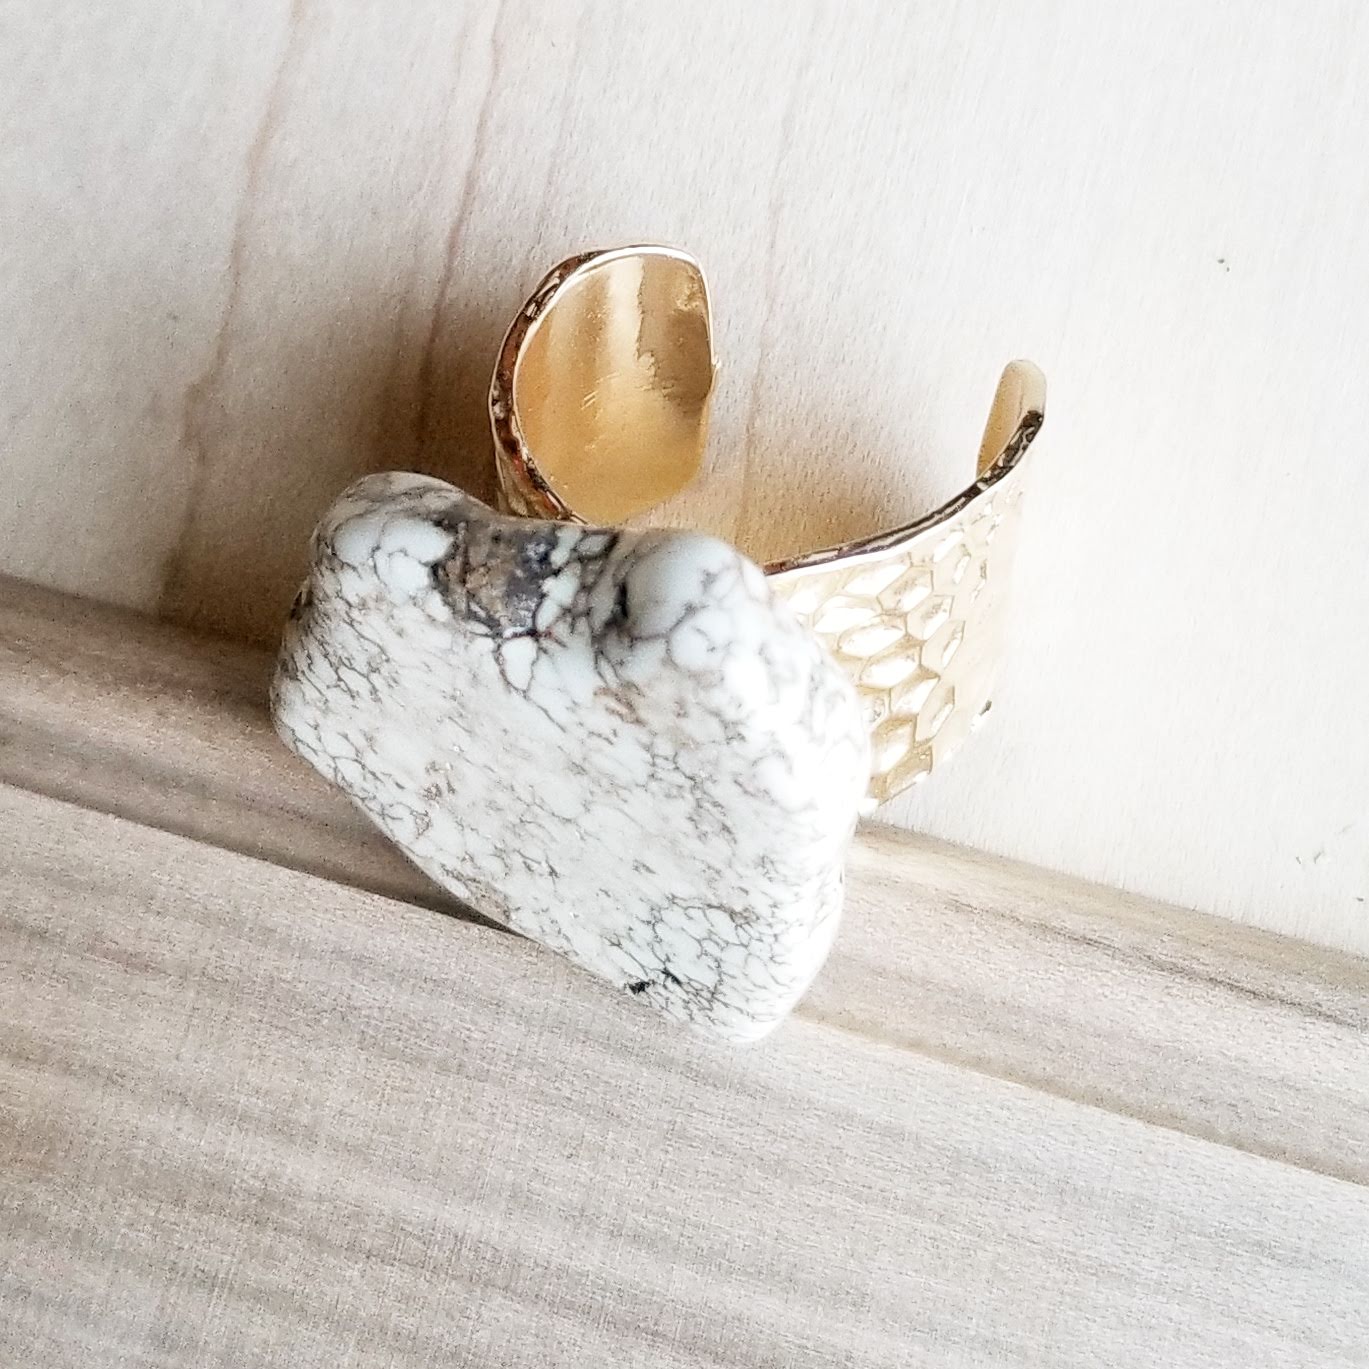 Buy wholesale White & gold leopard heart pin